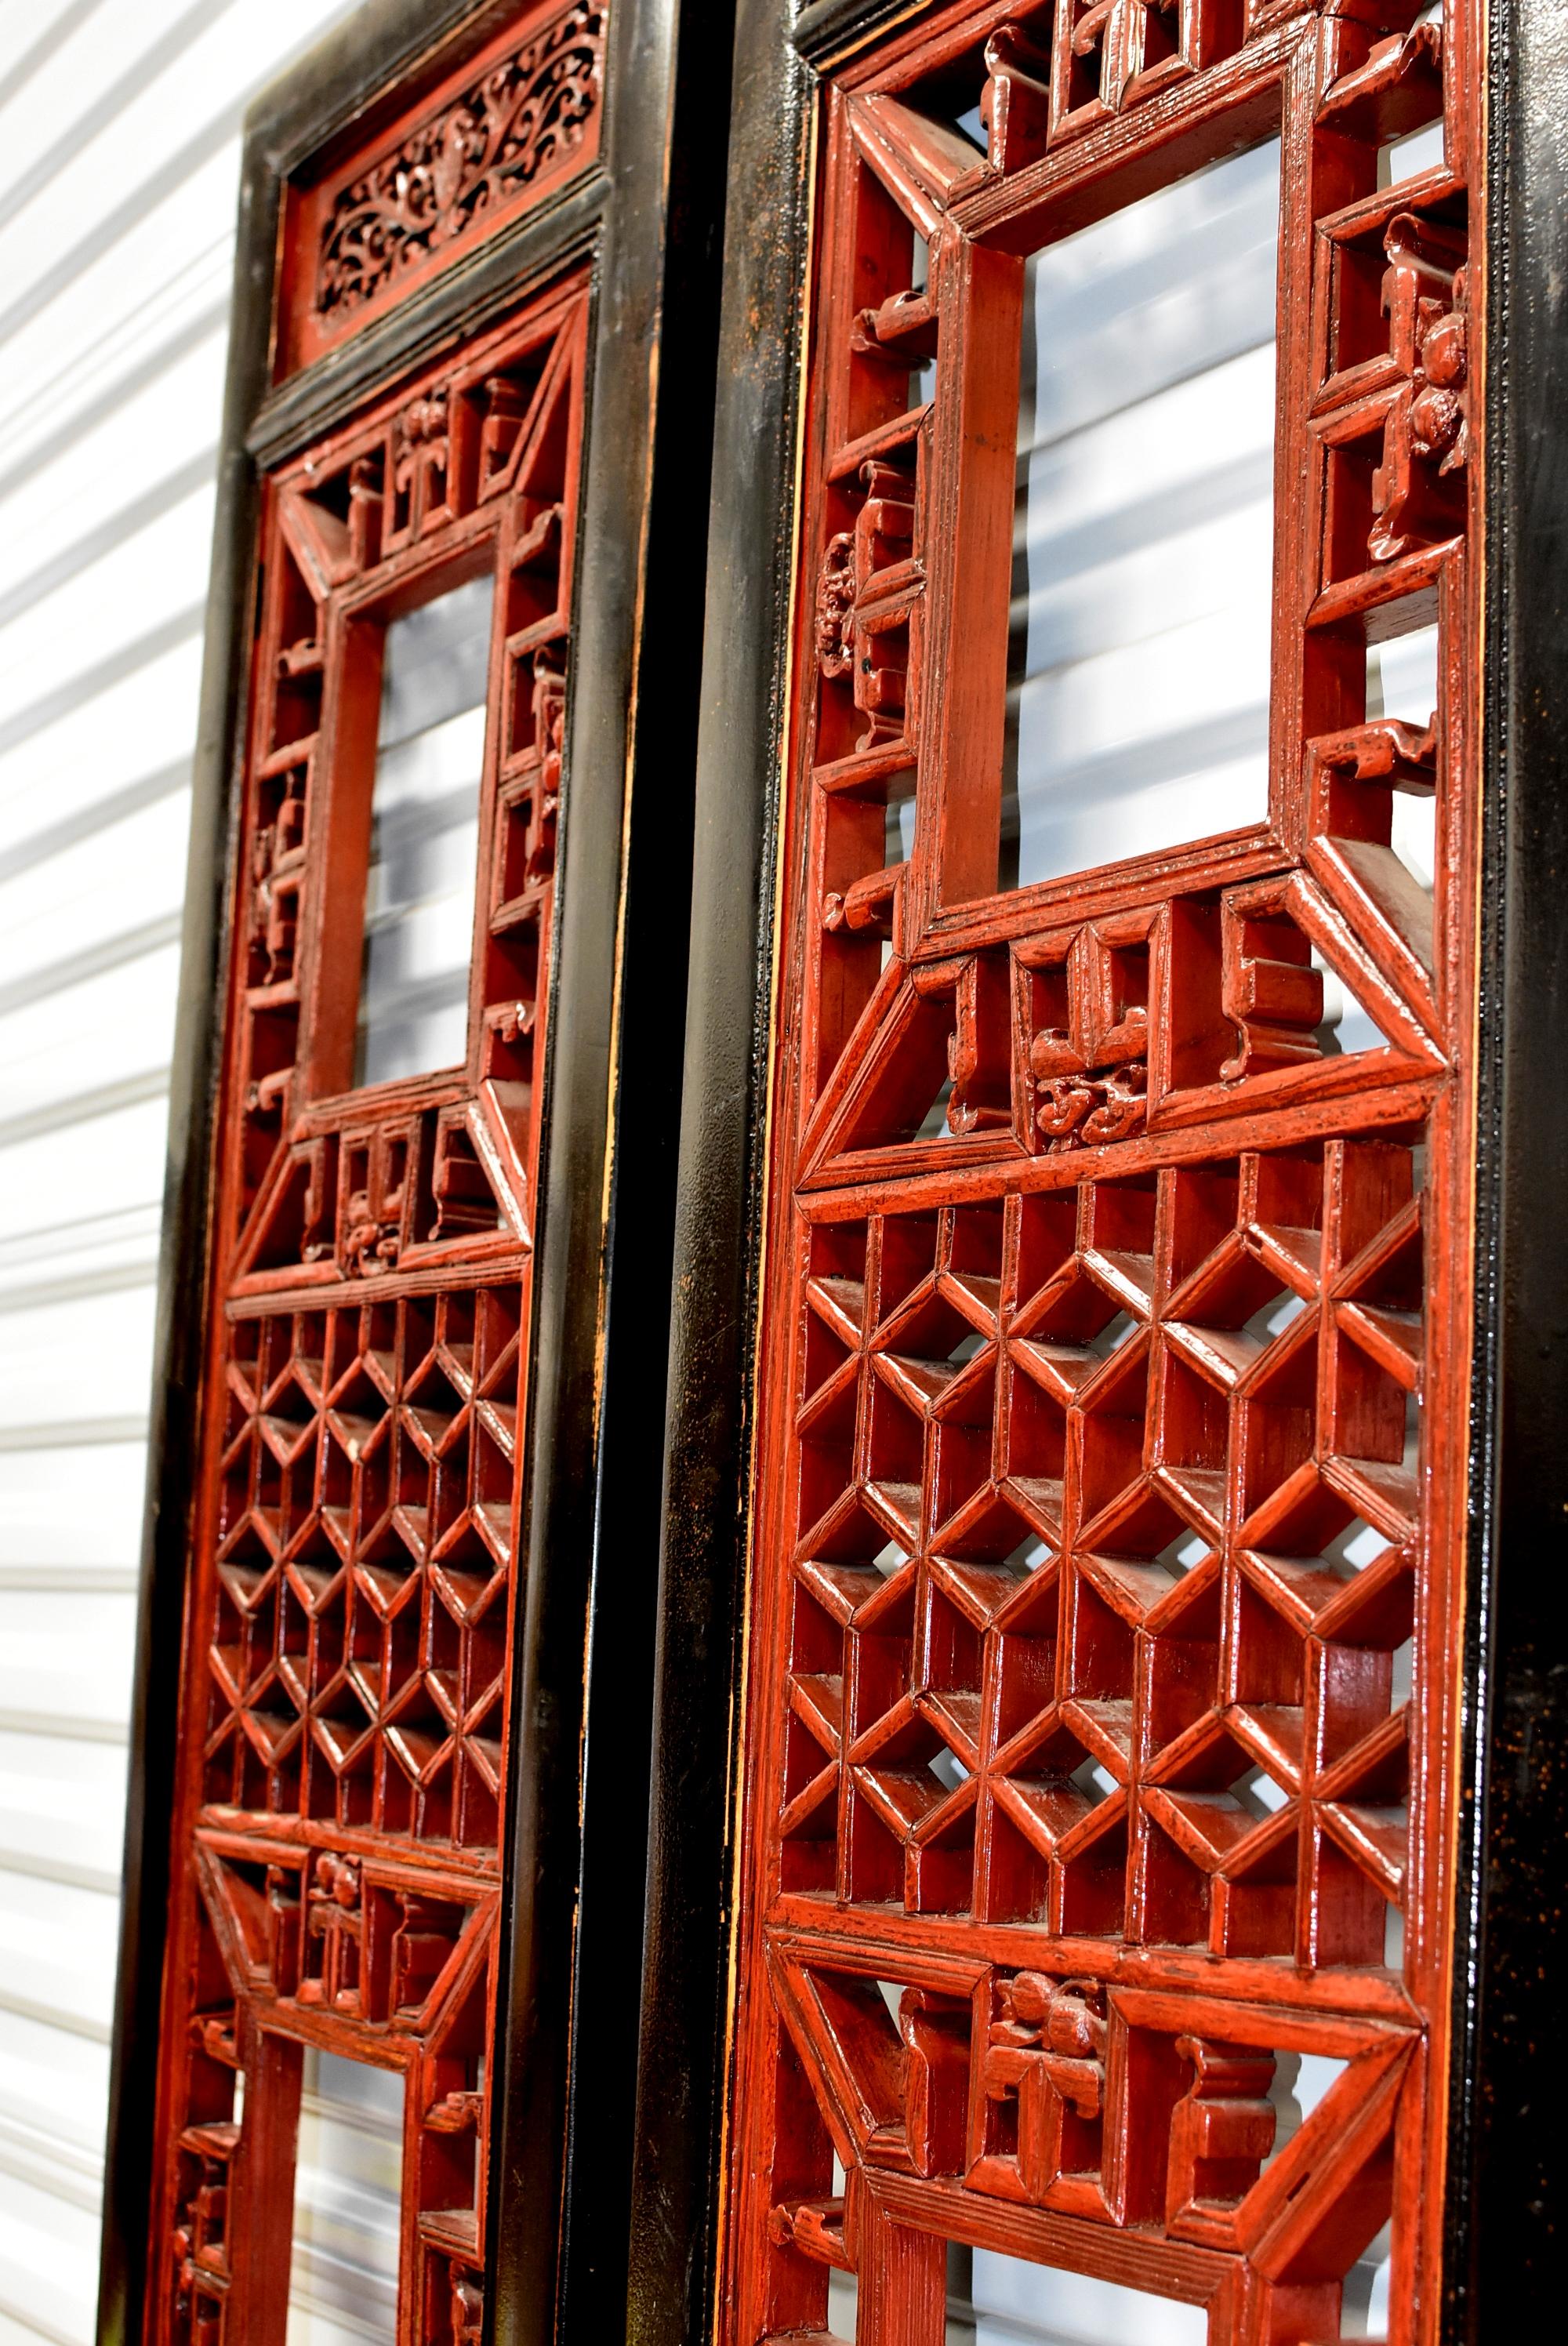 A pair of beautiful Chinese Antique screens in black and red lacquer. The main openwork was created using the painstaking joinery method. Every little piece is joined together by tenons and mortises, forming the famous 